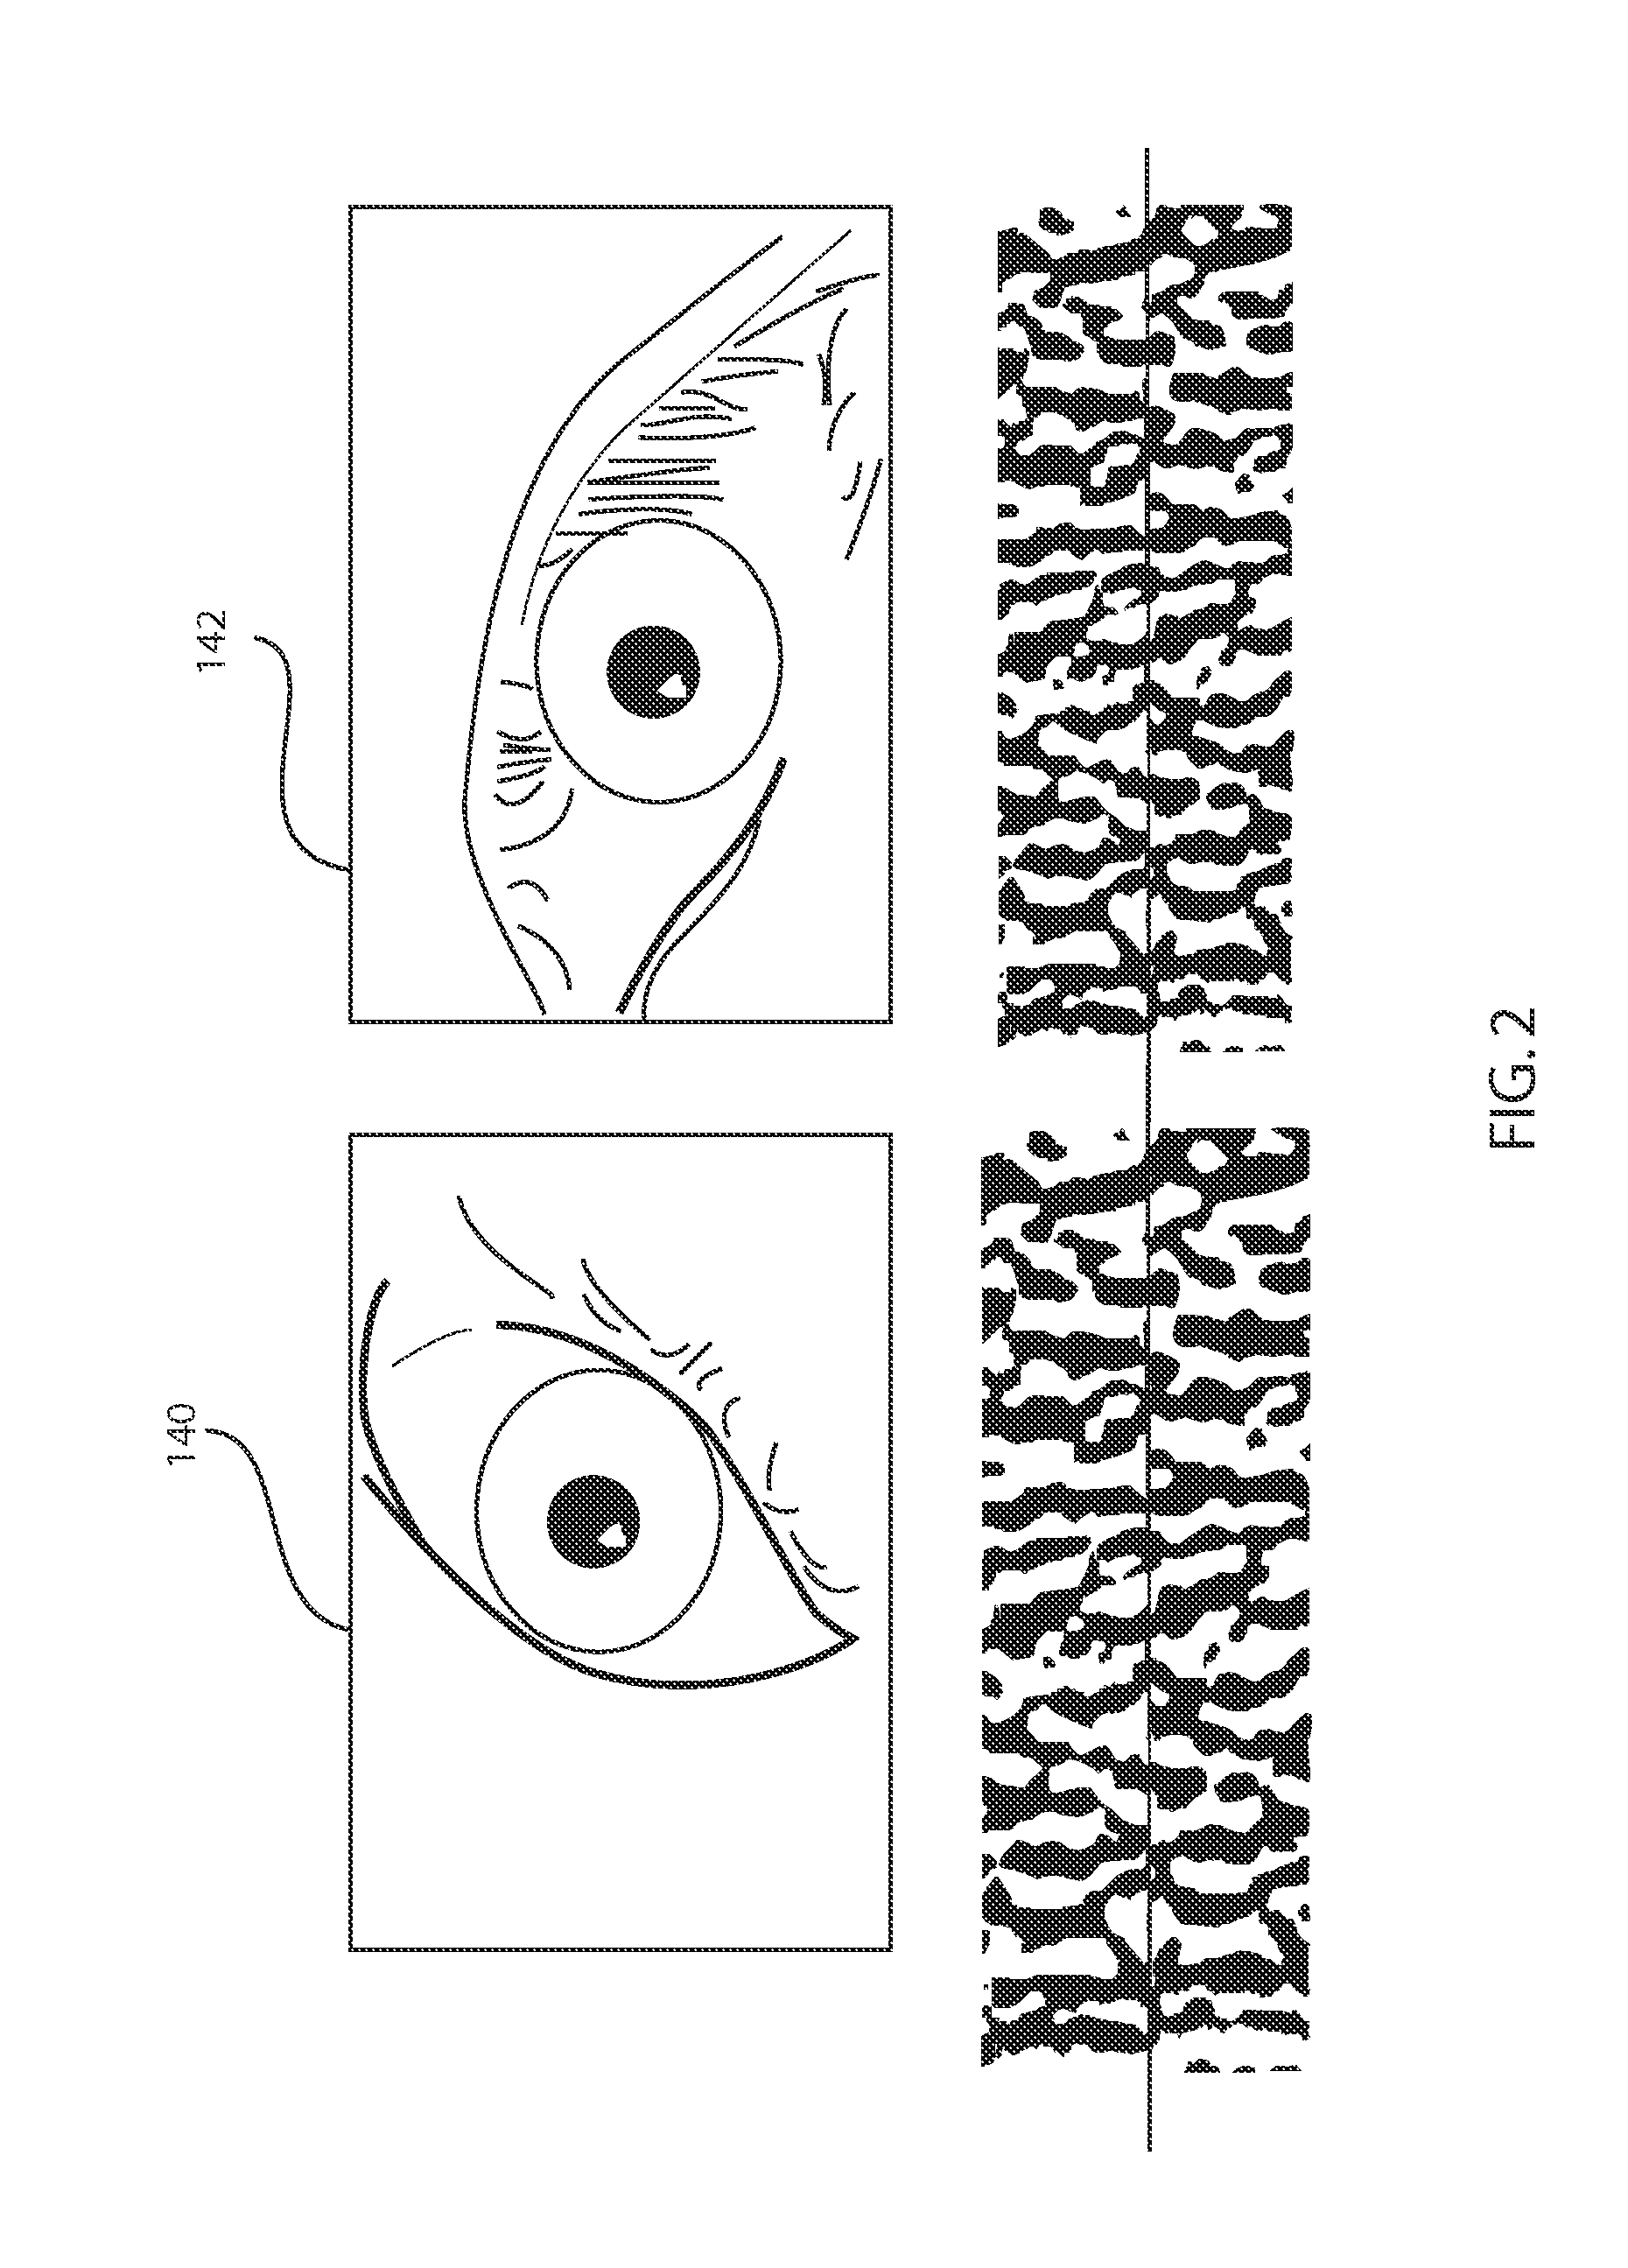 System and method for generating and employing short length iris codes